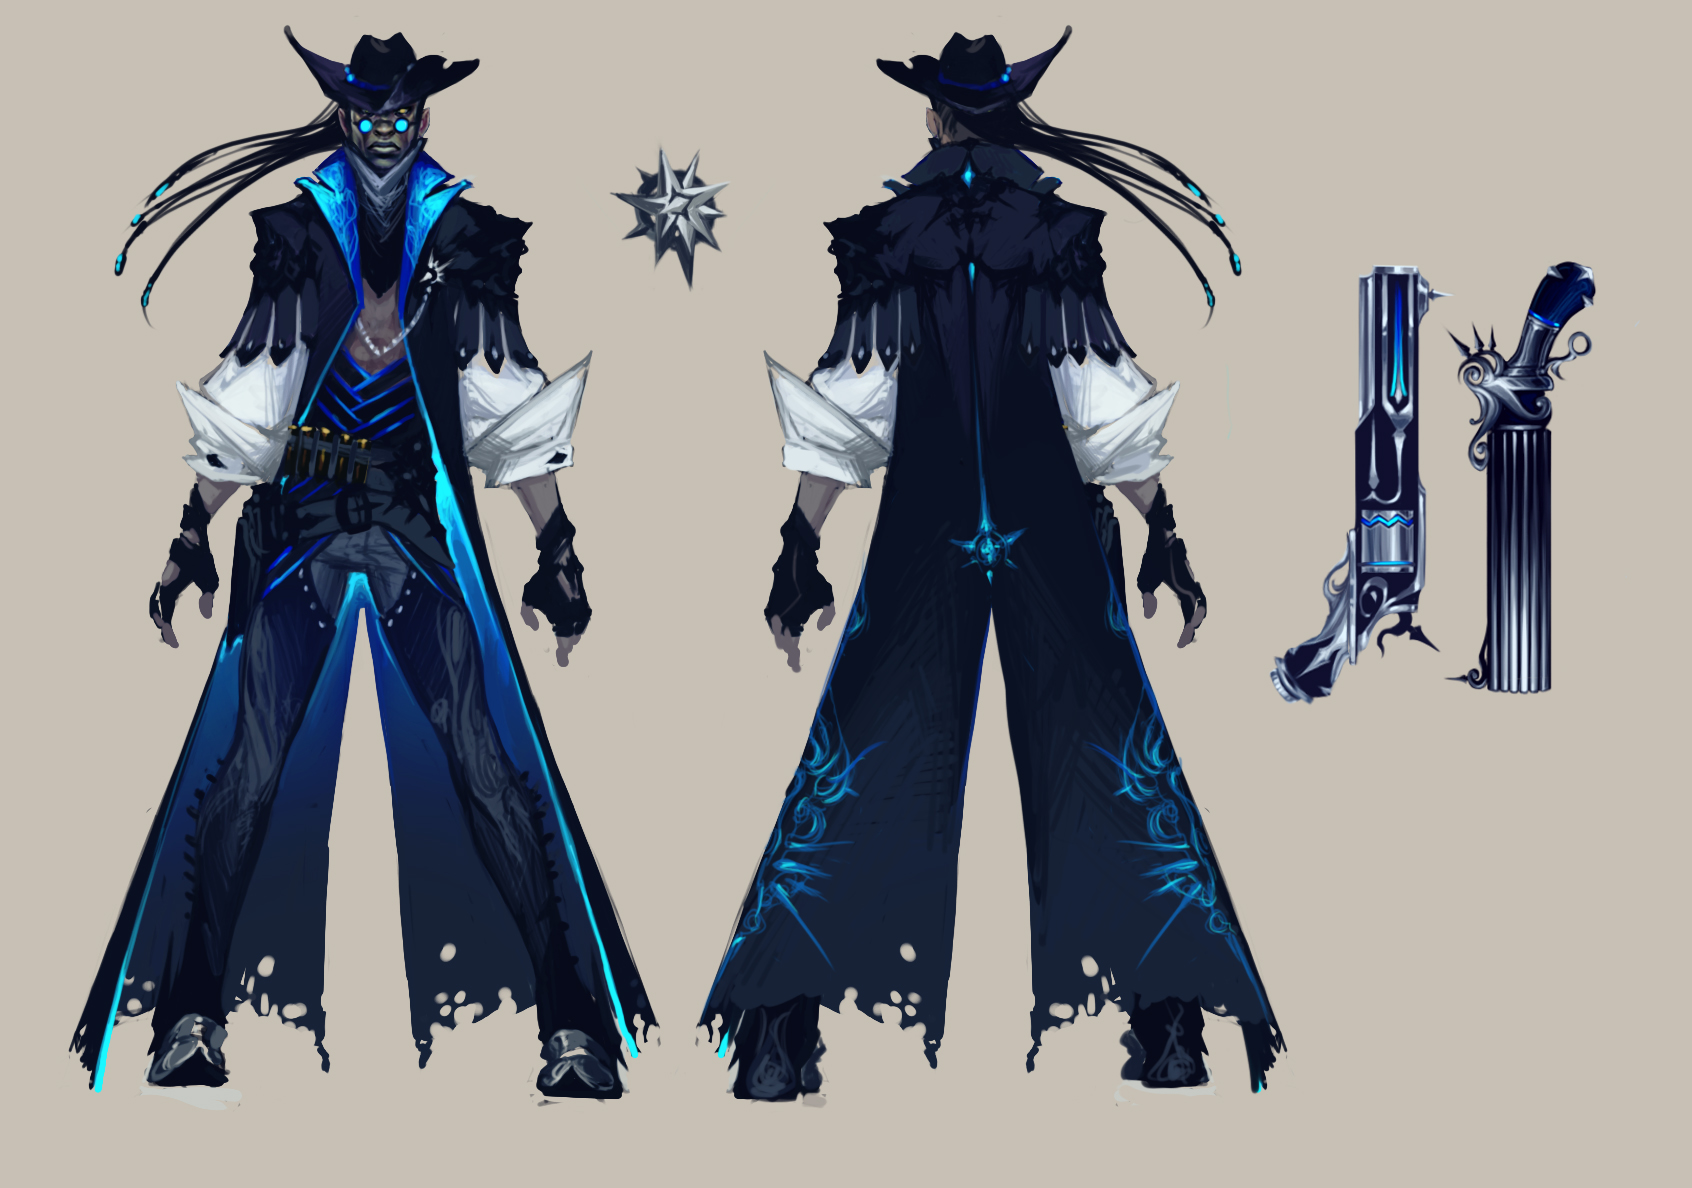 lucienlolcontest_outfit3_by_dapper_owl-d83cl9l.jpg